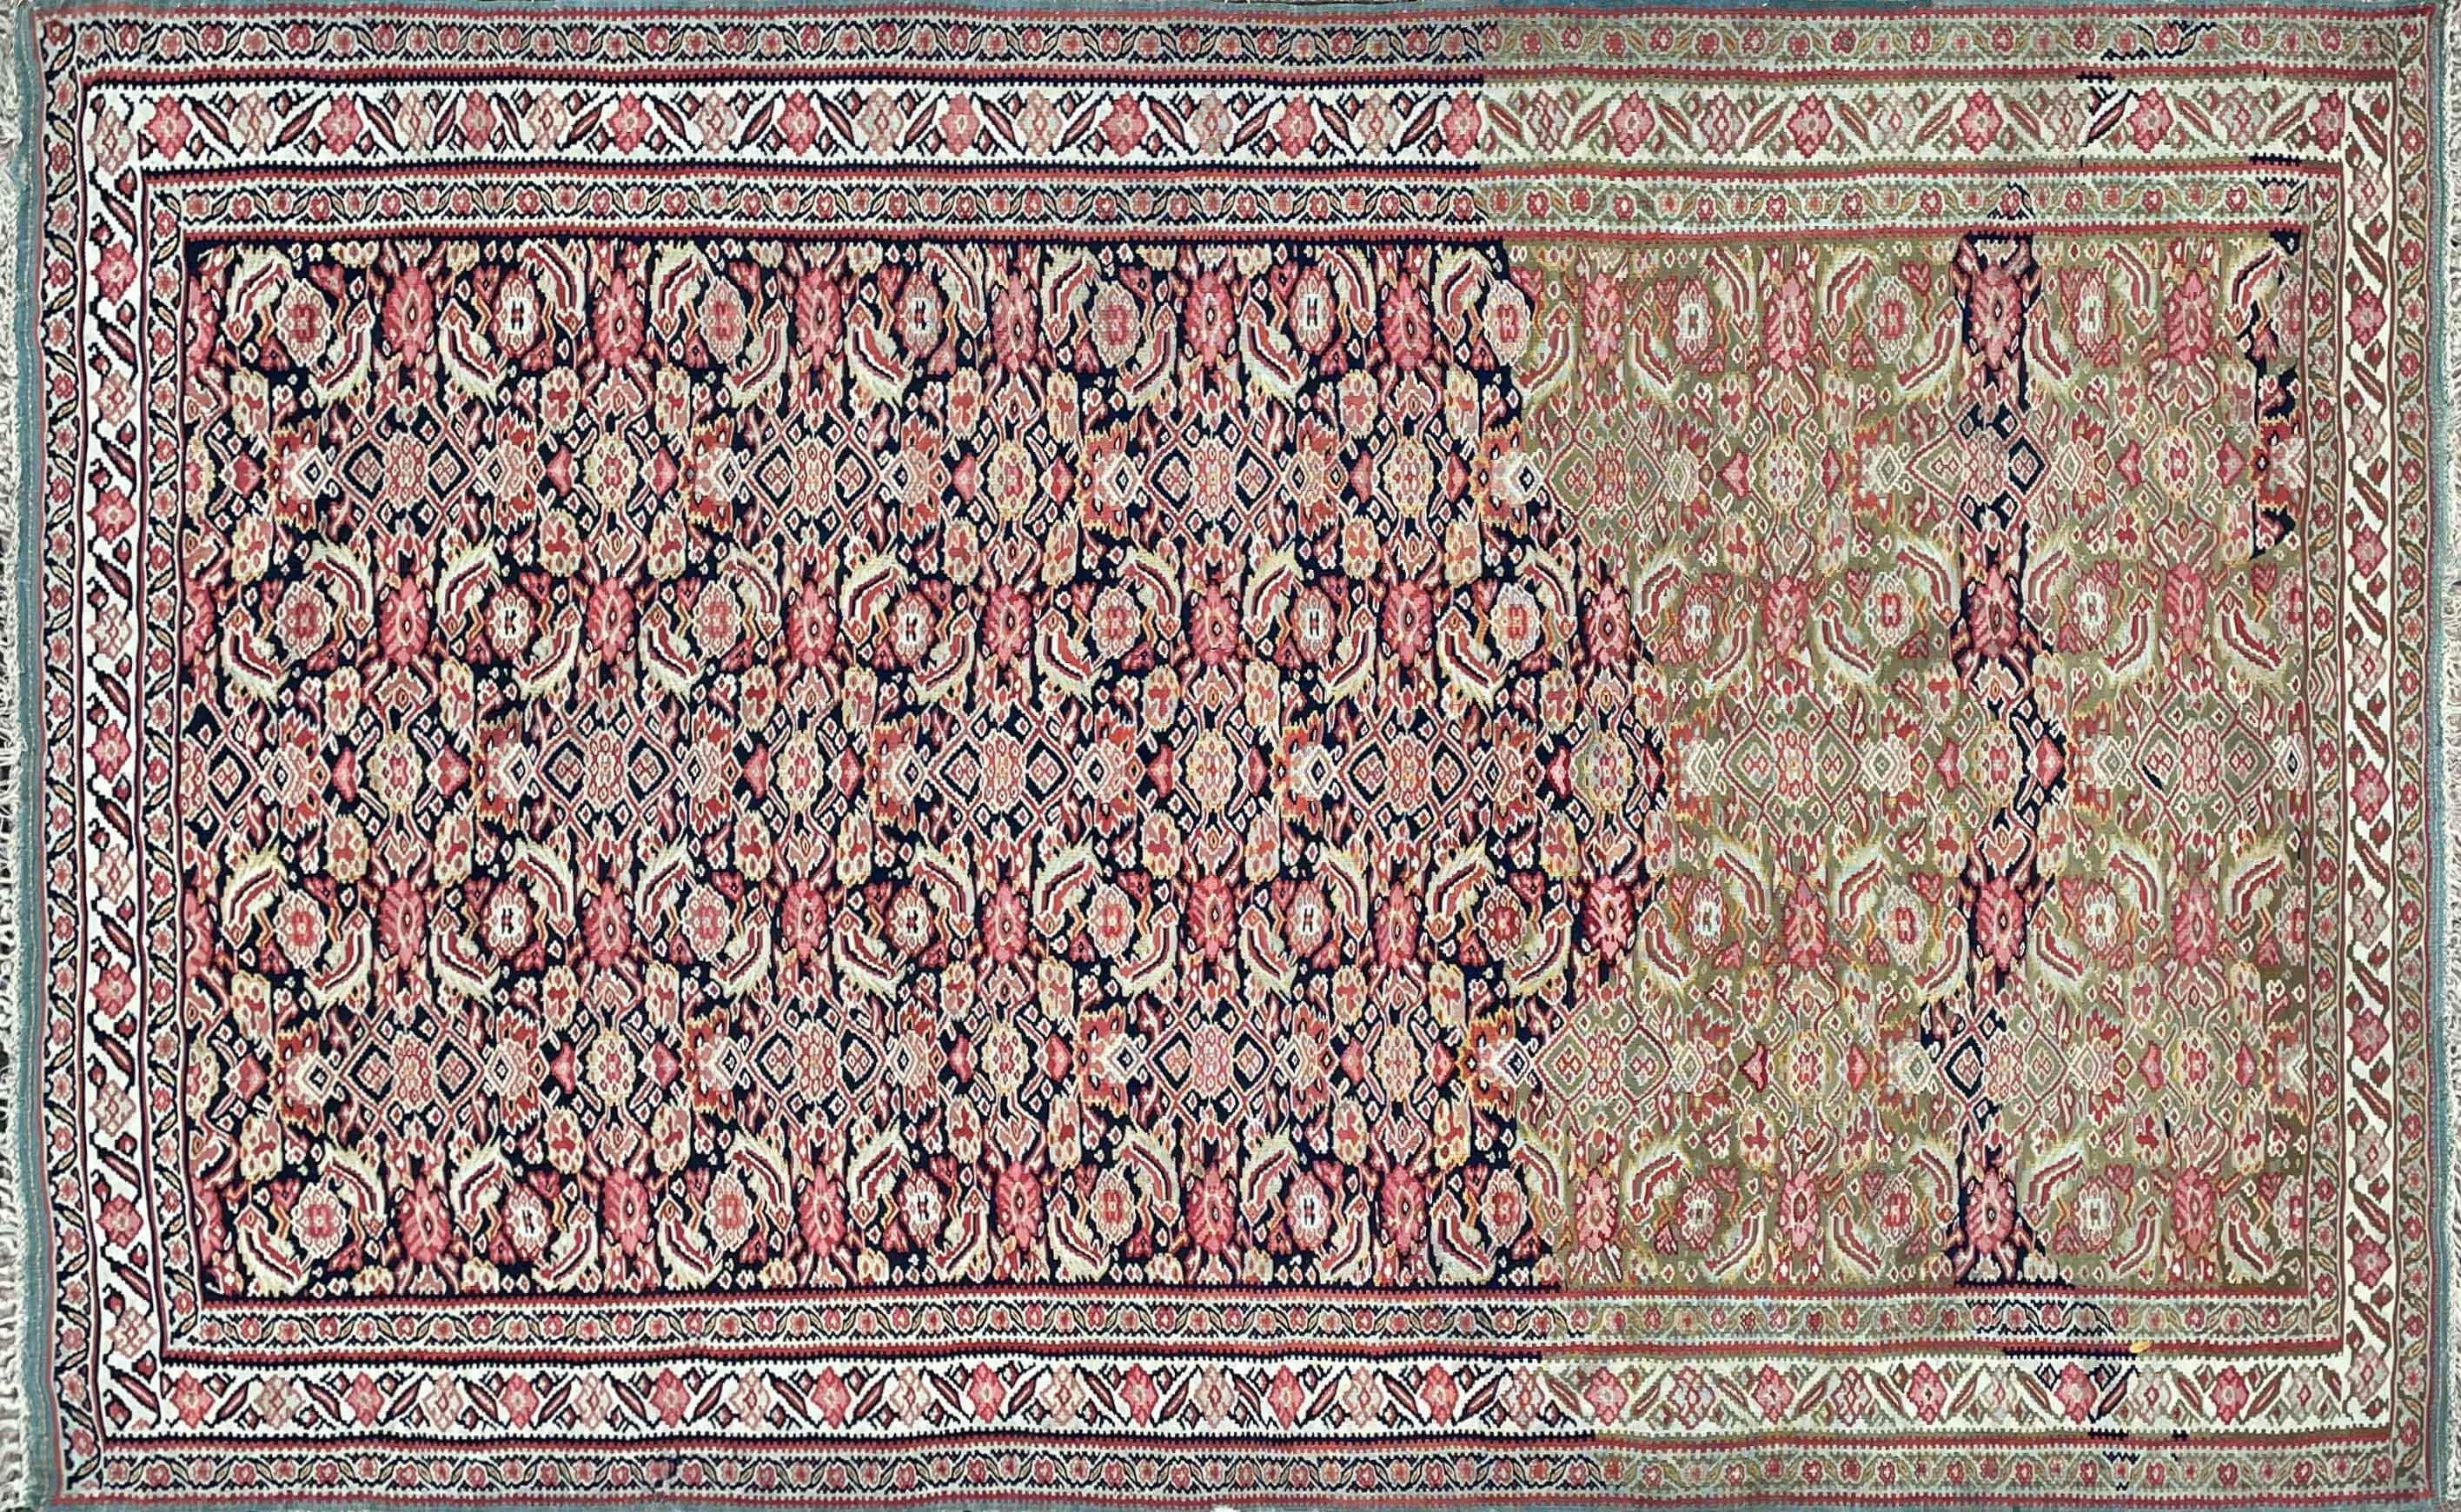 Enhancing the description of the Antique Persian Senneh Kilim Rug:
Adorning your space with an exquisite piece of textile art, we present an Antique Persian Senneh Kilim Rug from the early 20th century. This fine creation offers a visual tapestry of